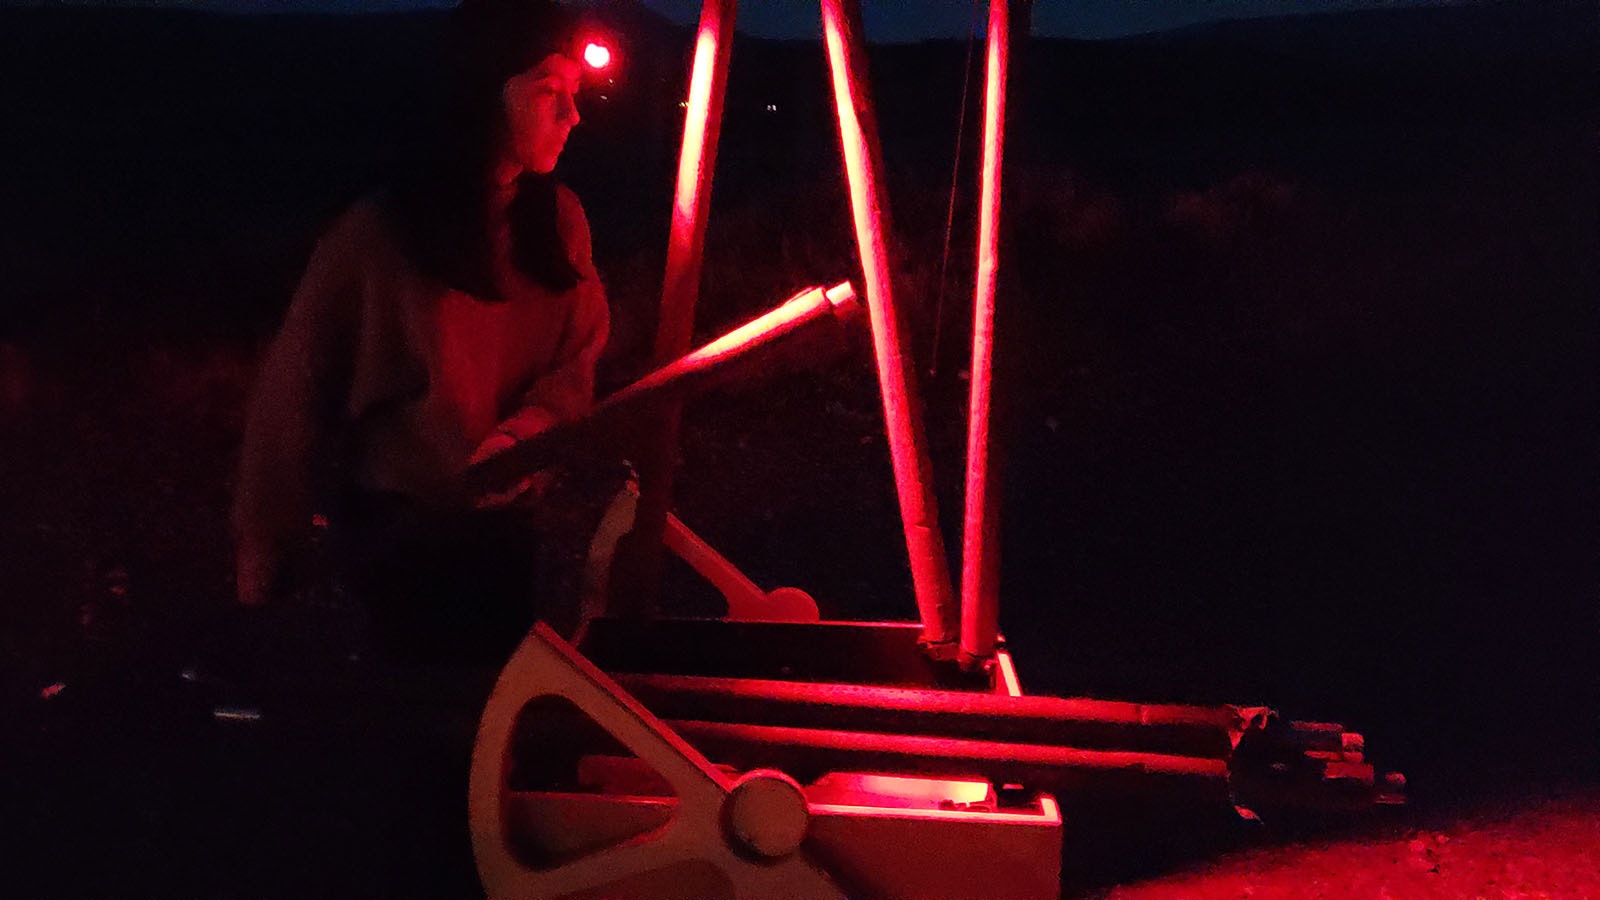 Rachel Fischer puts together a mobile telescope on the fringe of Grand Teton National Park using only a red light. Red lights don't cause one's eyes to contract, helping to preserve better night sight.